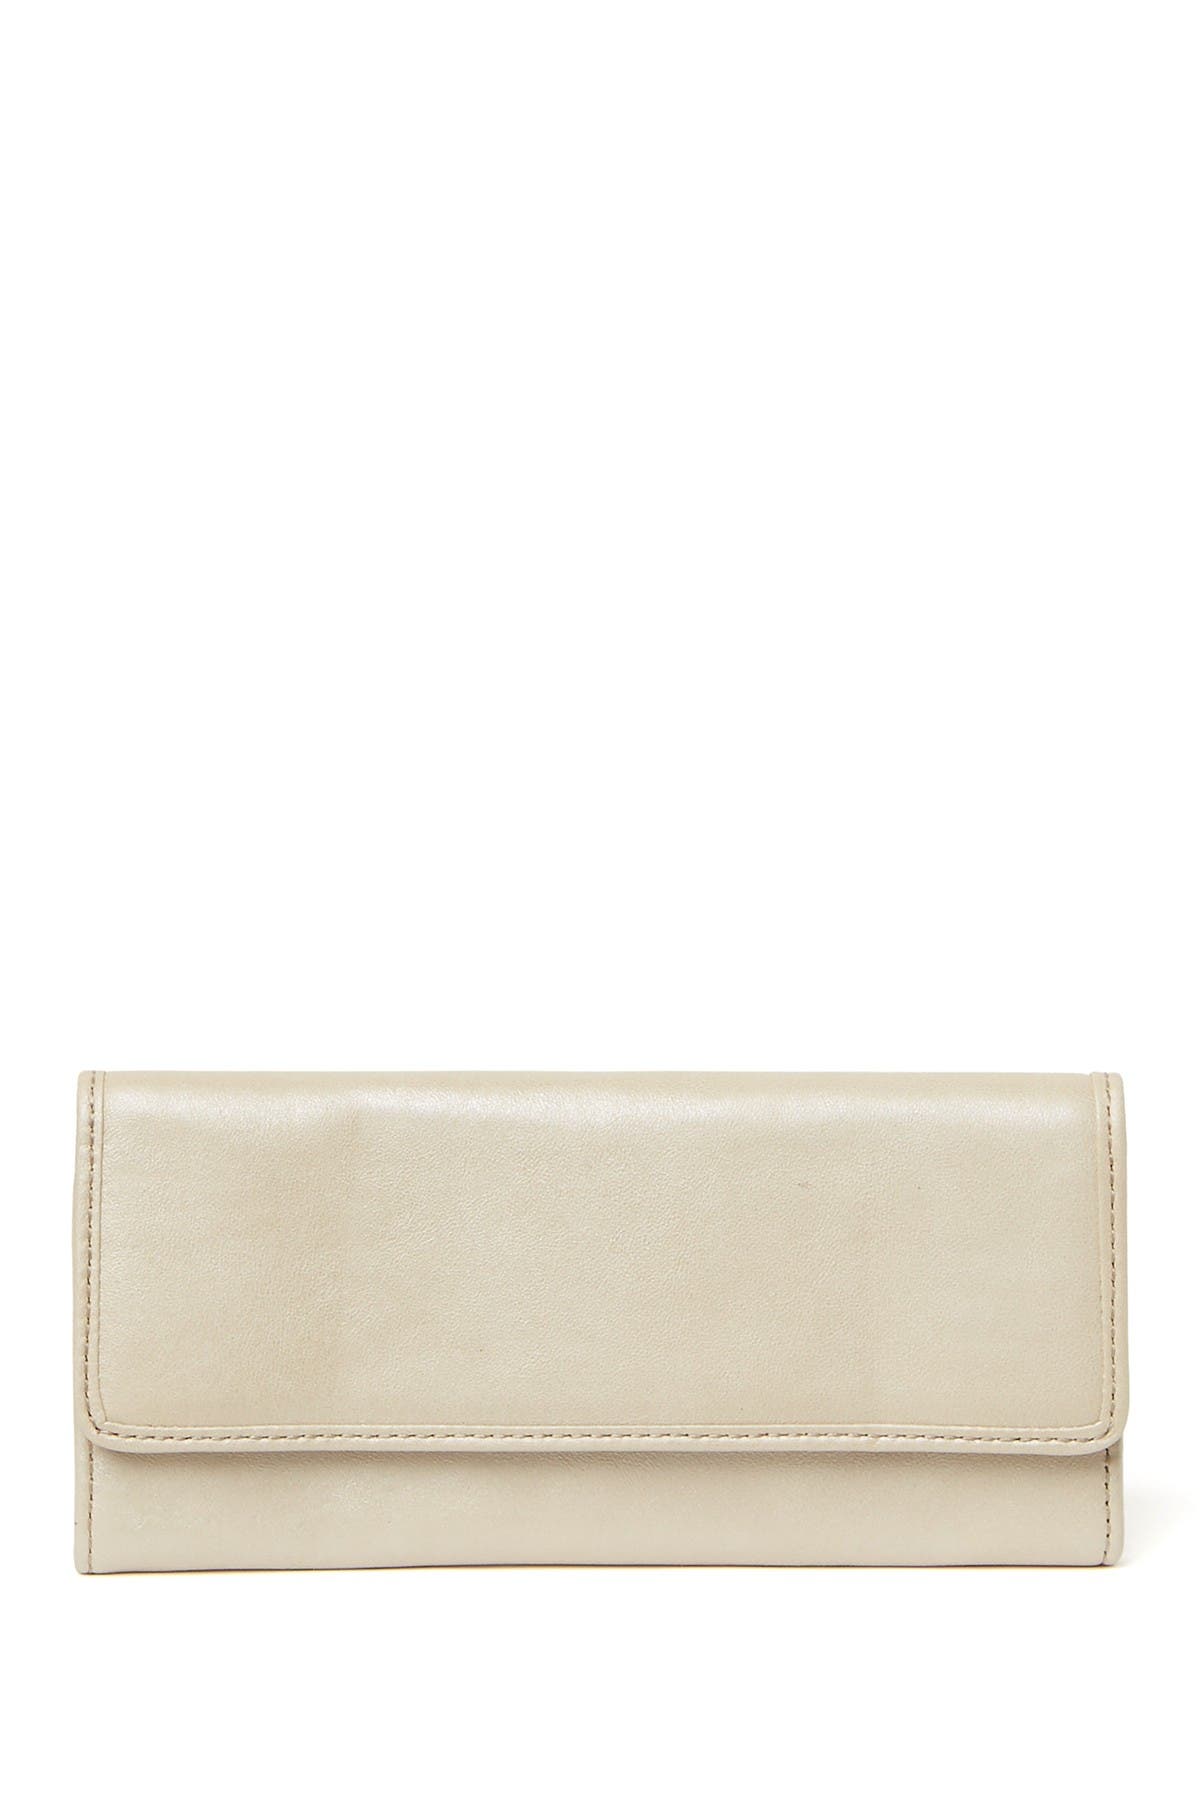 Hobo Ardor Leather Continental Wallet In Sandshell